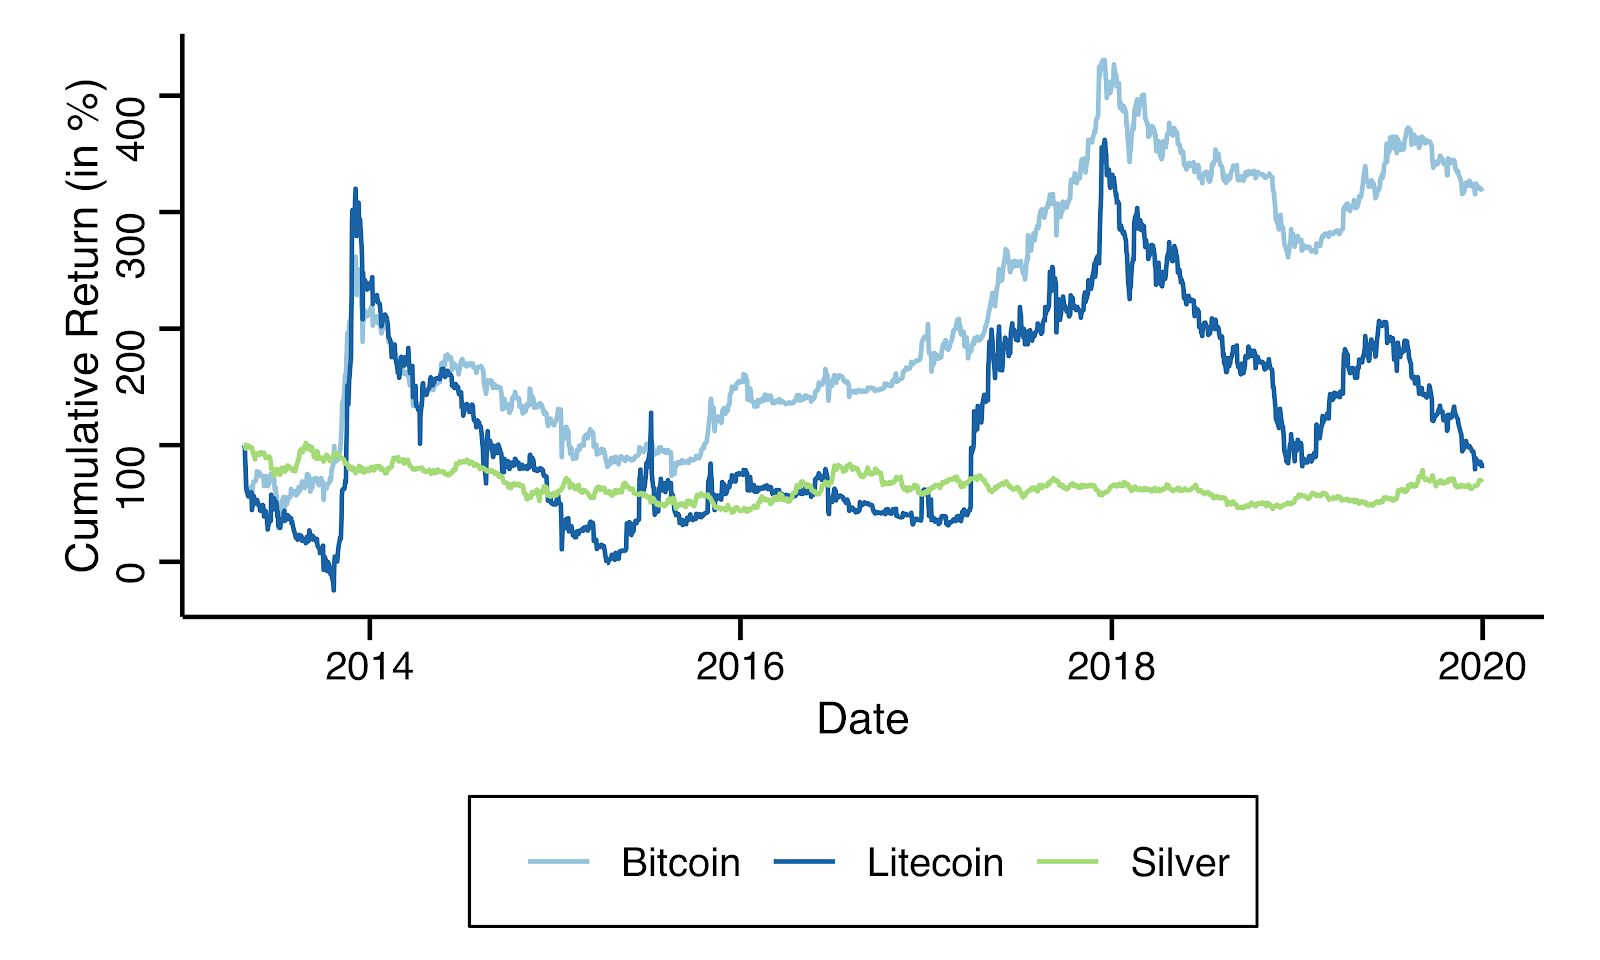 Cumulative Bitcoin, Litecoin and silver returns from investments made between May 2013 and January 2020